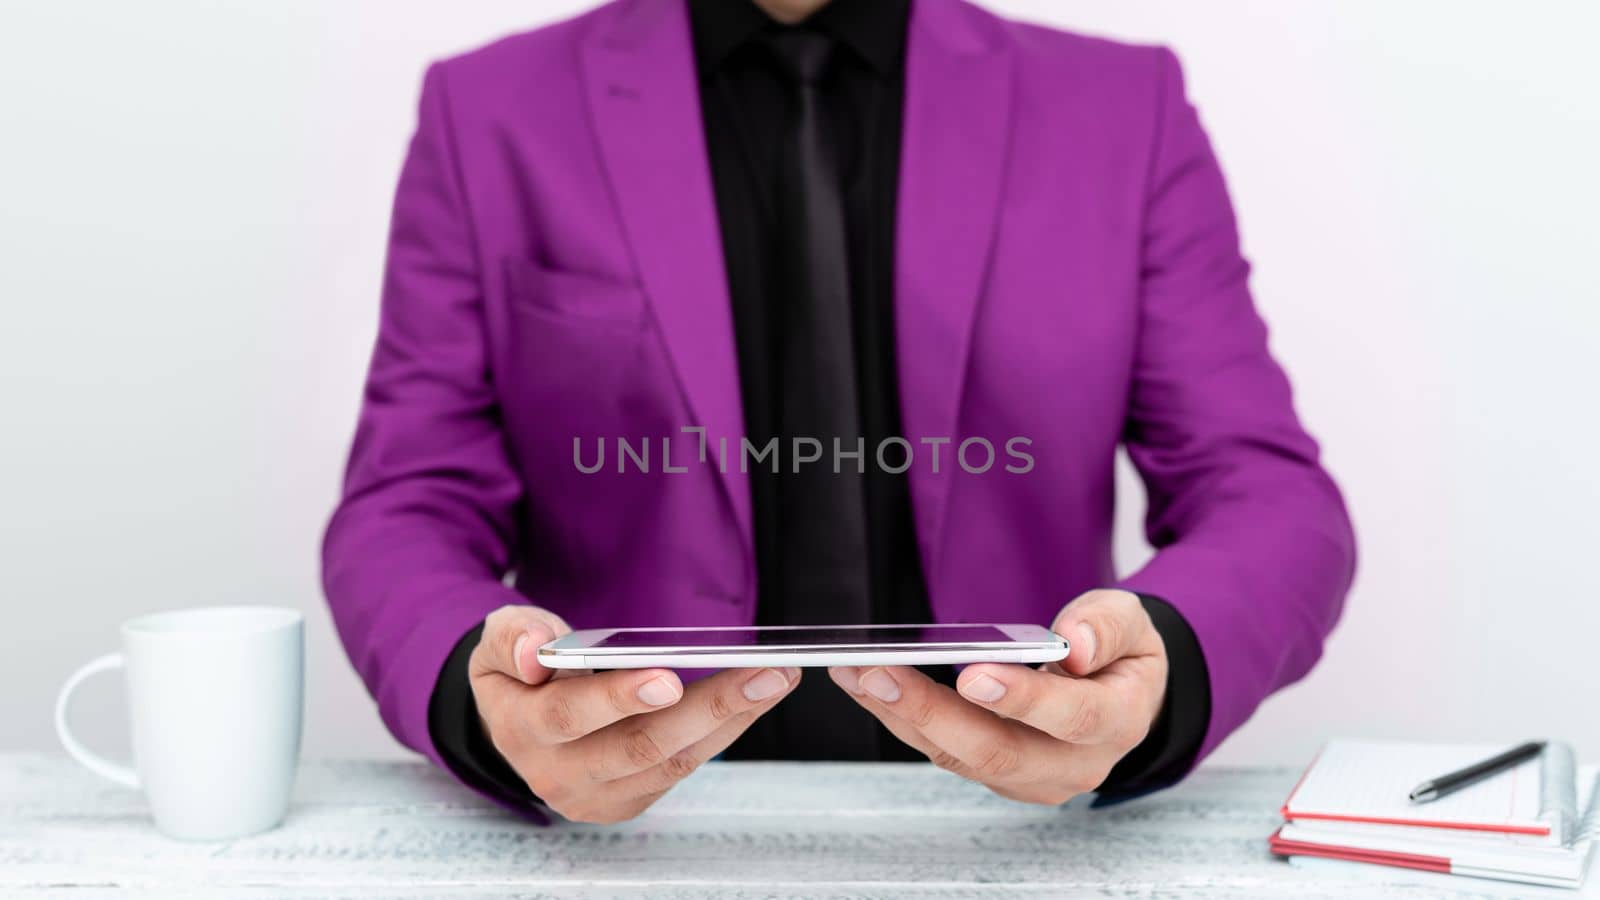 Businessman in Pink jacket sitting at a table and holding a mobile phone.